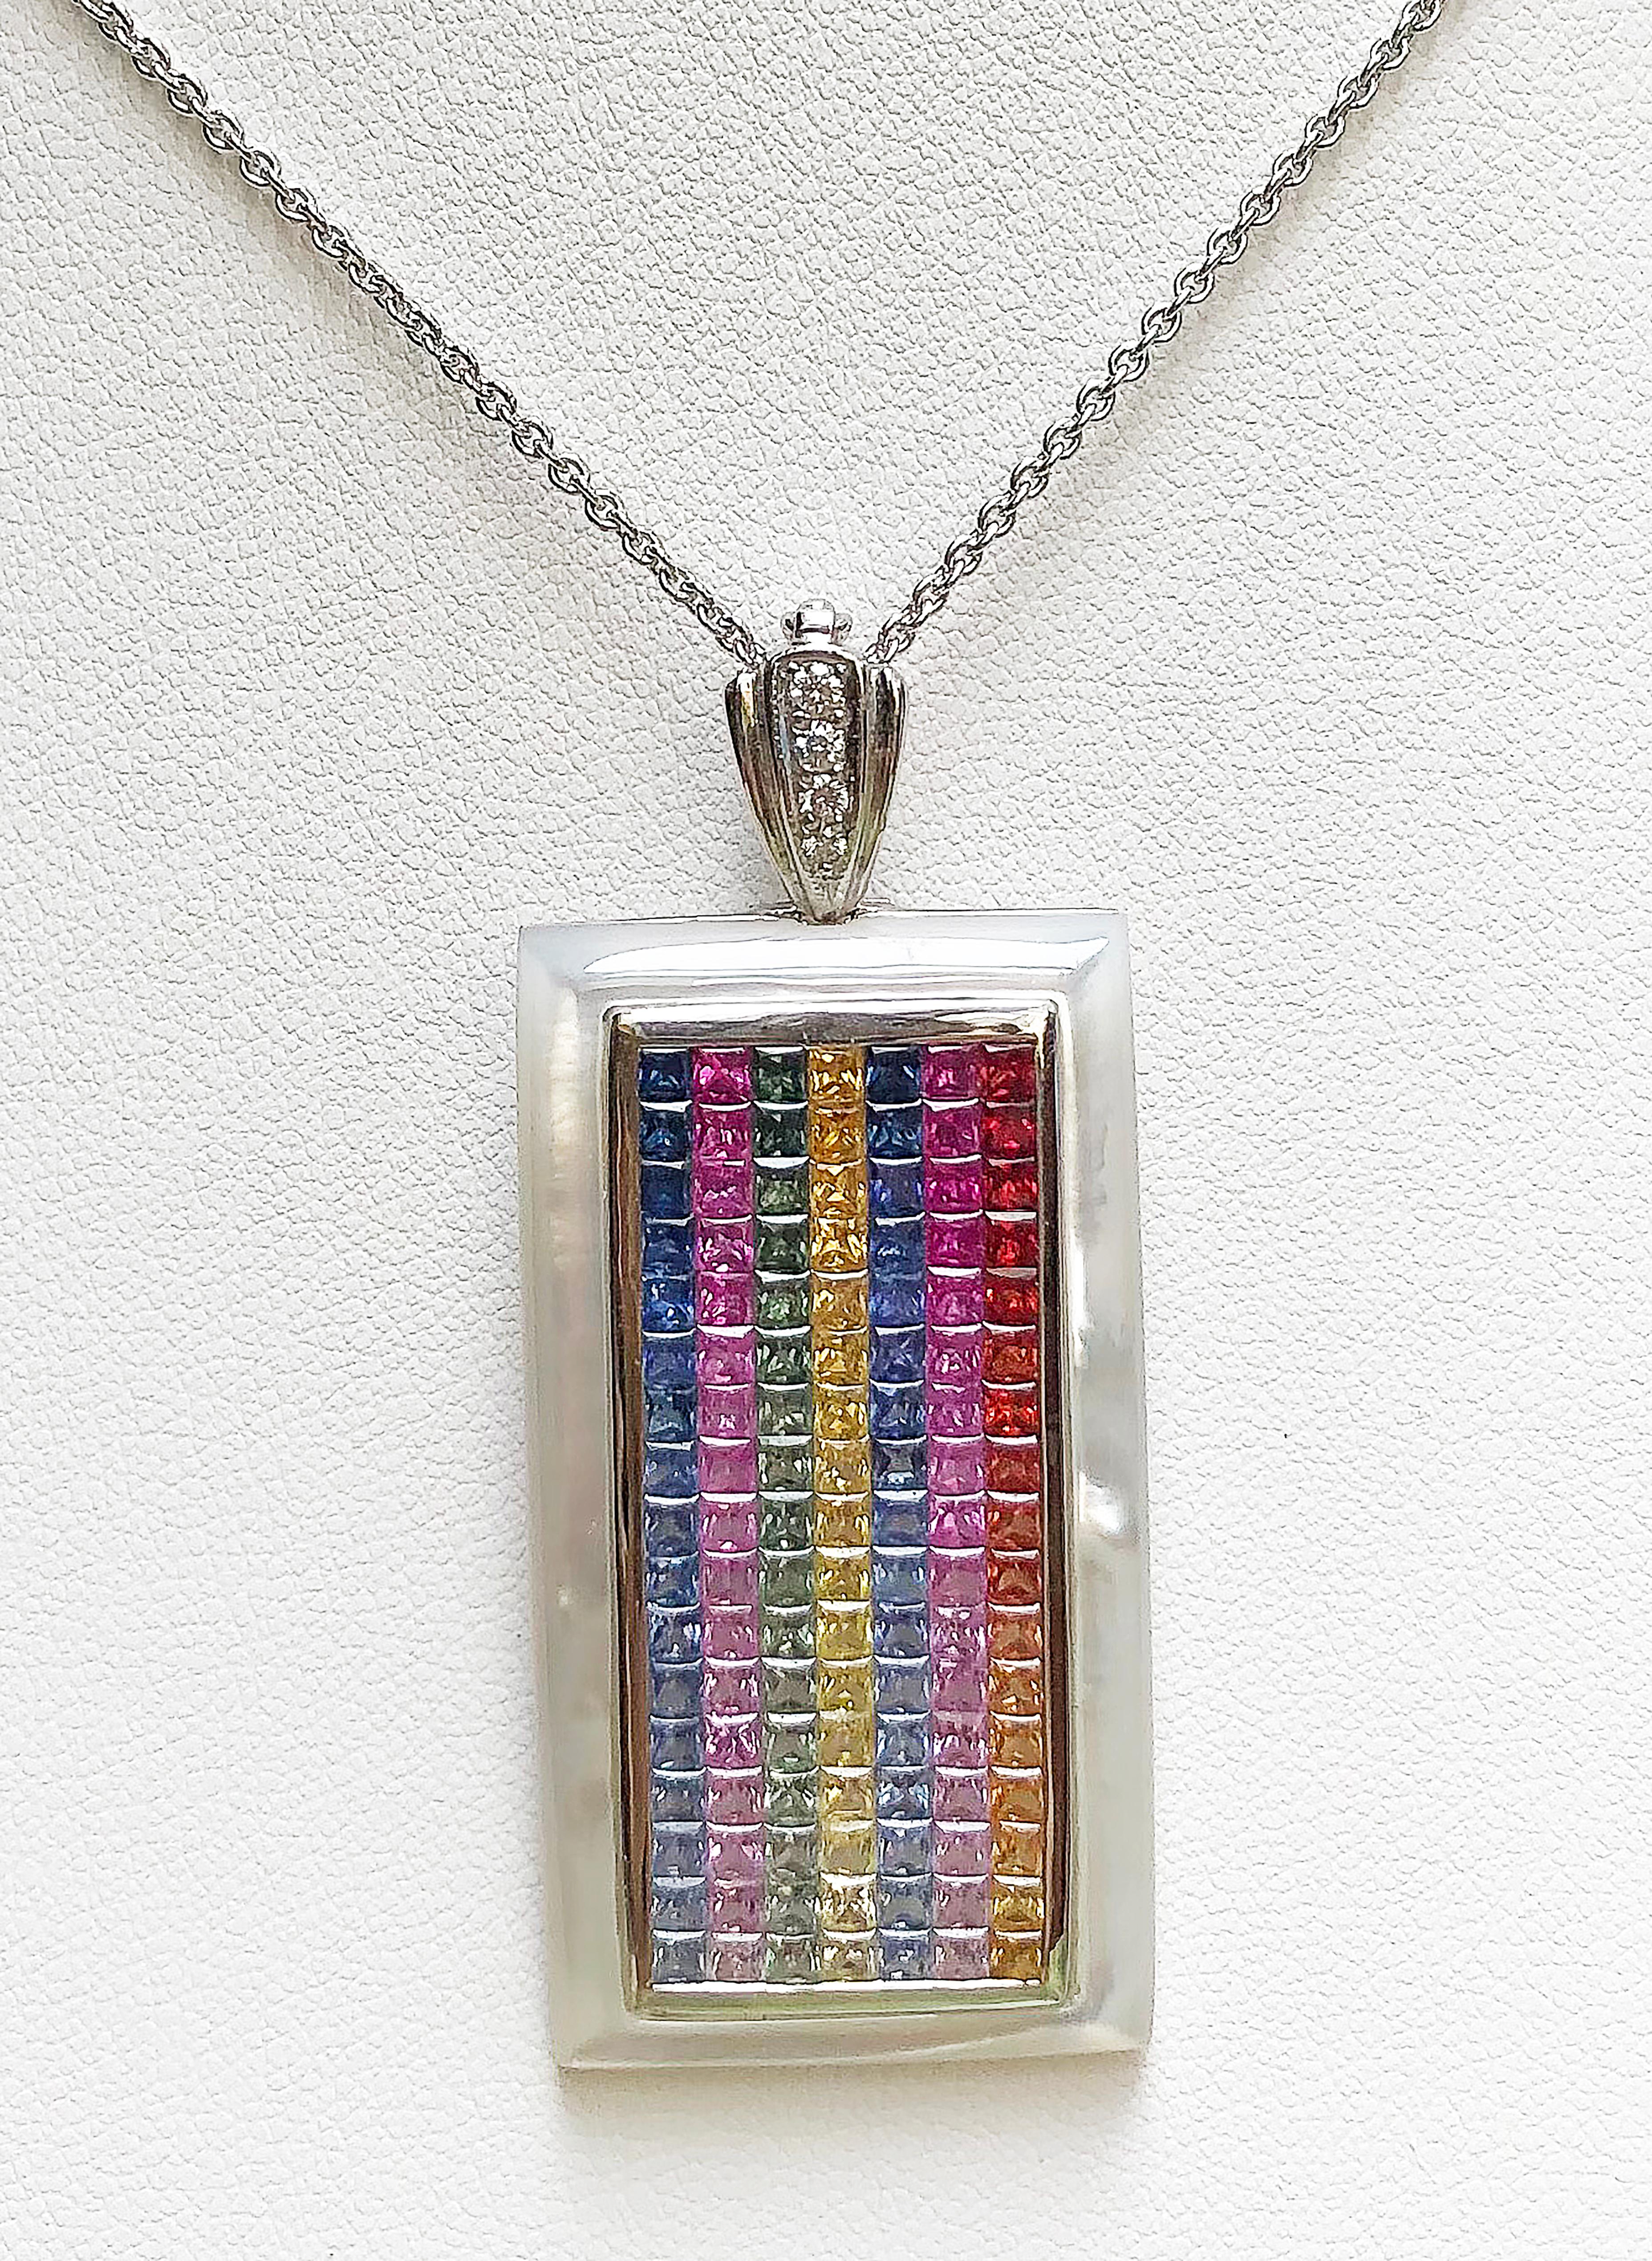 Rainbow Colour Sapphire 9.52 carats with Diamond 0.09 carat Pendant set in 18 Karat White Gold Settings
(chain not included)

Width:  2.3 cm 
Length: 5.5 cm
Total Weight: 17.37 grams

